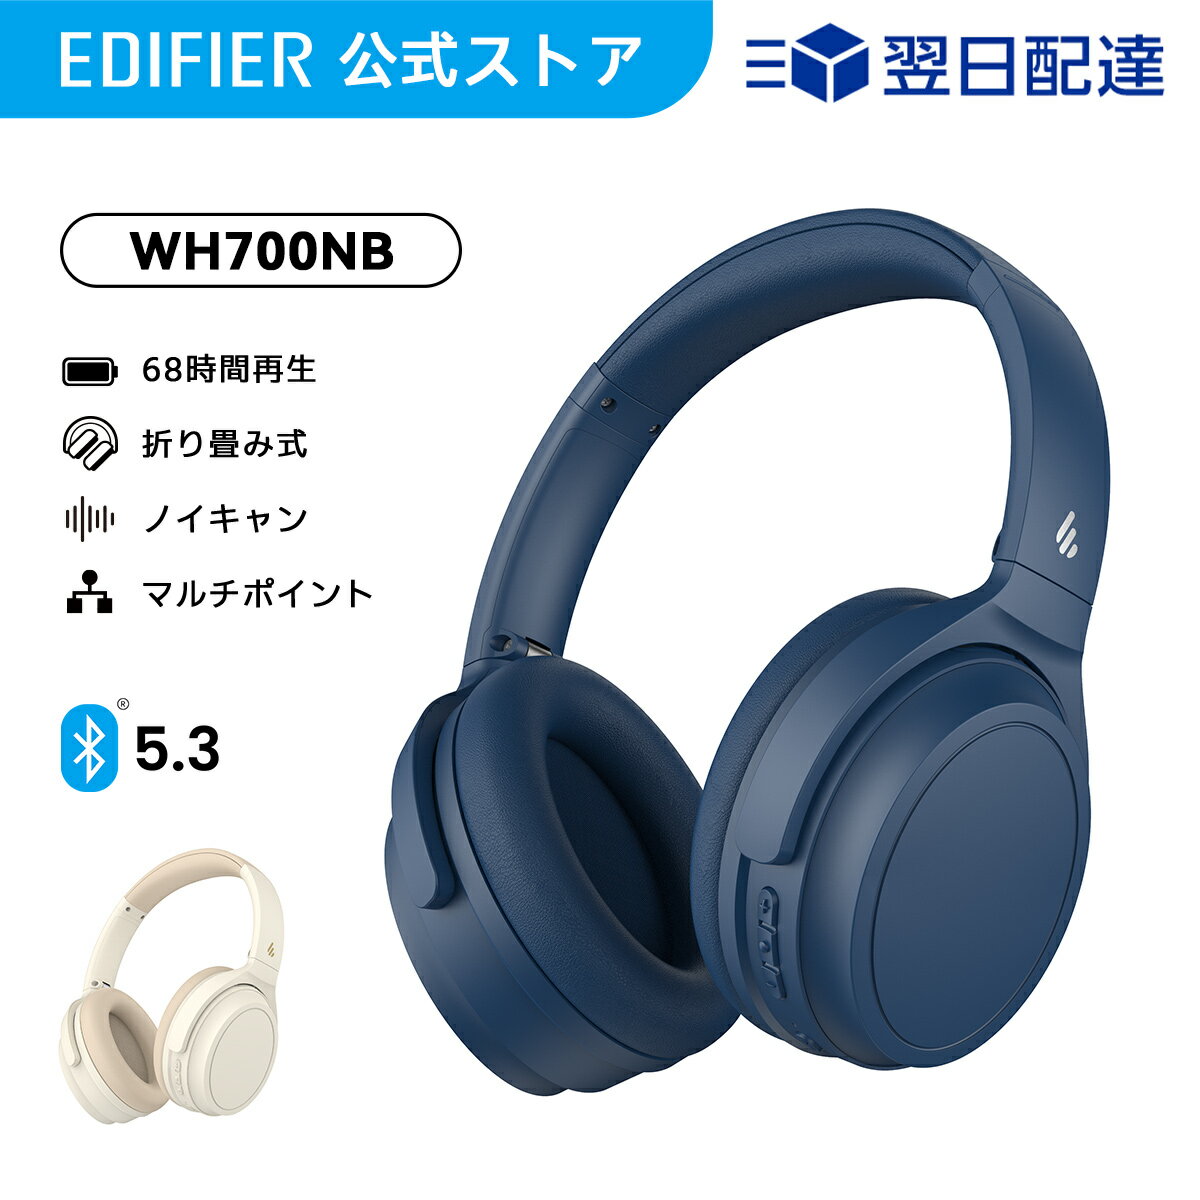 ڥݥ4,999ߡEDIFIER WH700NB 磻쥹 إåɥۥ Bluetooth 5.3 Υ󥻥  68ֺ ޤ ޥդ إåɥå ̵  磻쥹إåɥۥ إåɥե 餫  夳ʤ PC ޥ iPhone Android ̵